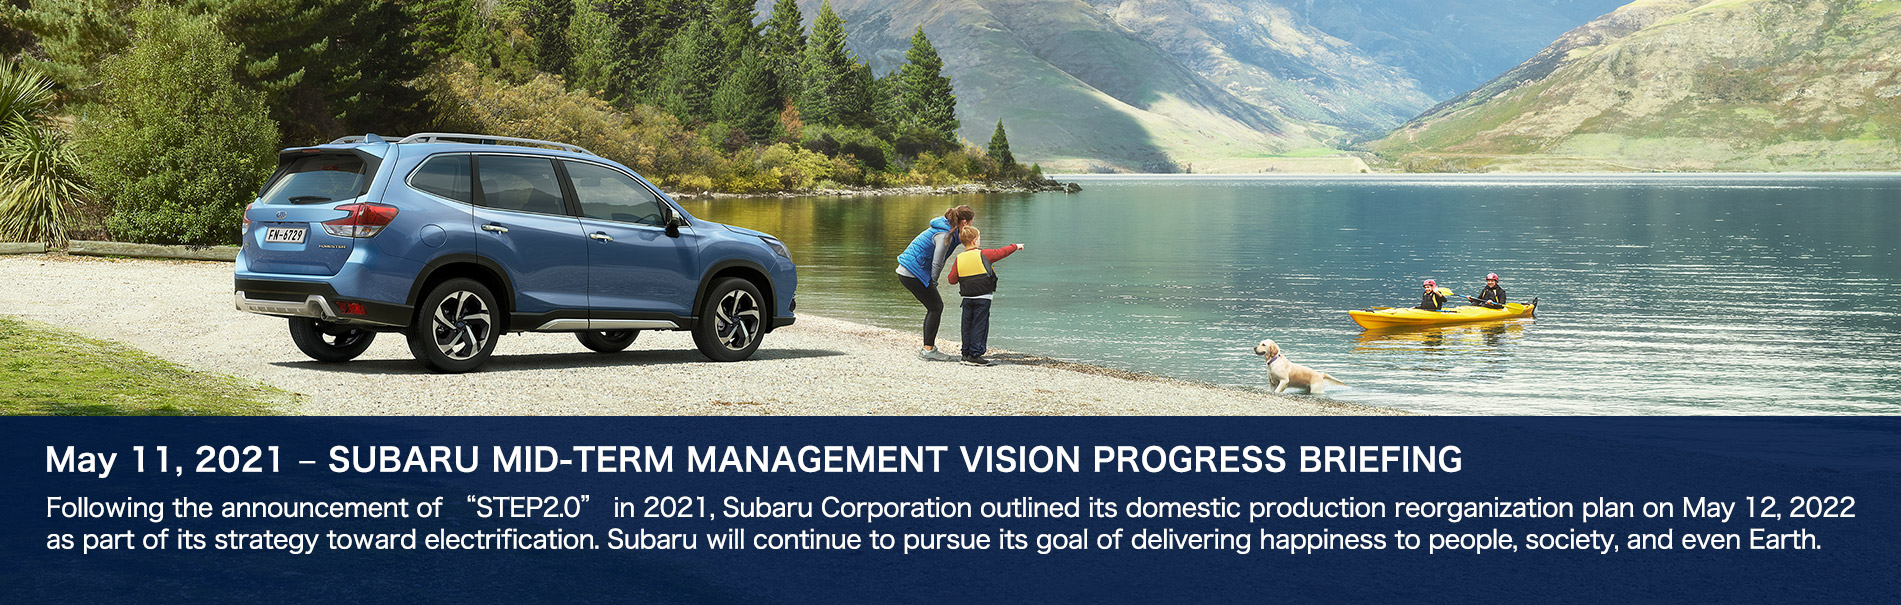 May 11, 2021 – SUBARU MID-TERM MANAGEMENT VISION PROGRESS BRIEFING Following the announcement of “STEP2.0” in 2021, Subaru Corporation outlined its domestic production reorganization plan on May 12, 2022 as part of its strategy toward electrification. Subaru will continue to pursue its goal of delivering happiness to people, society, and even Earth.